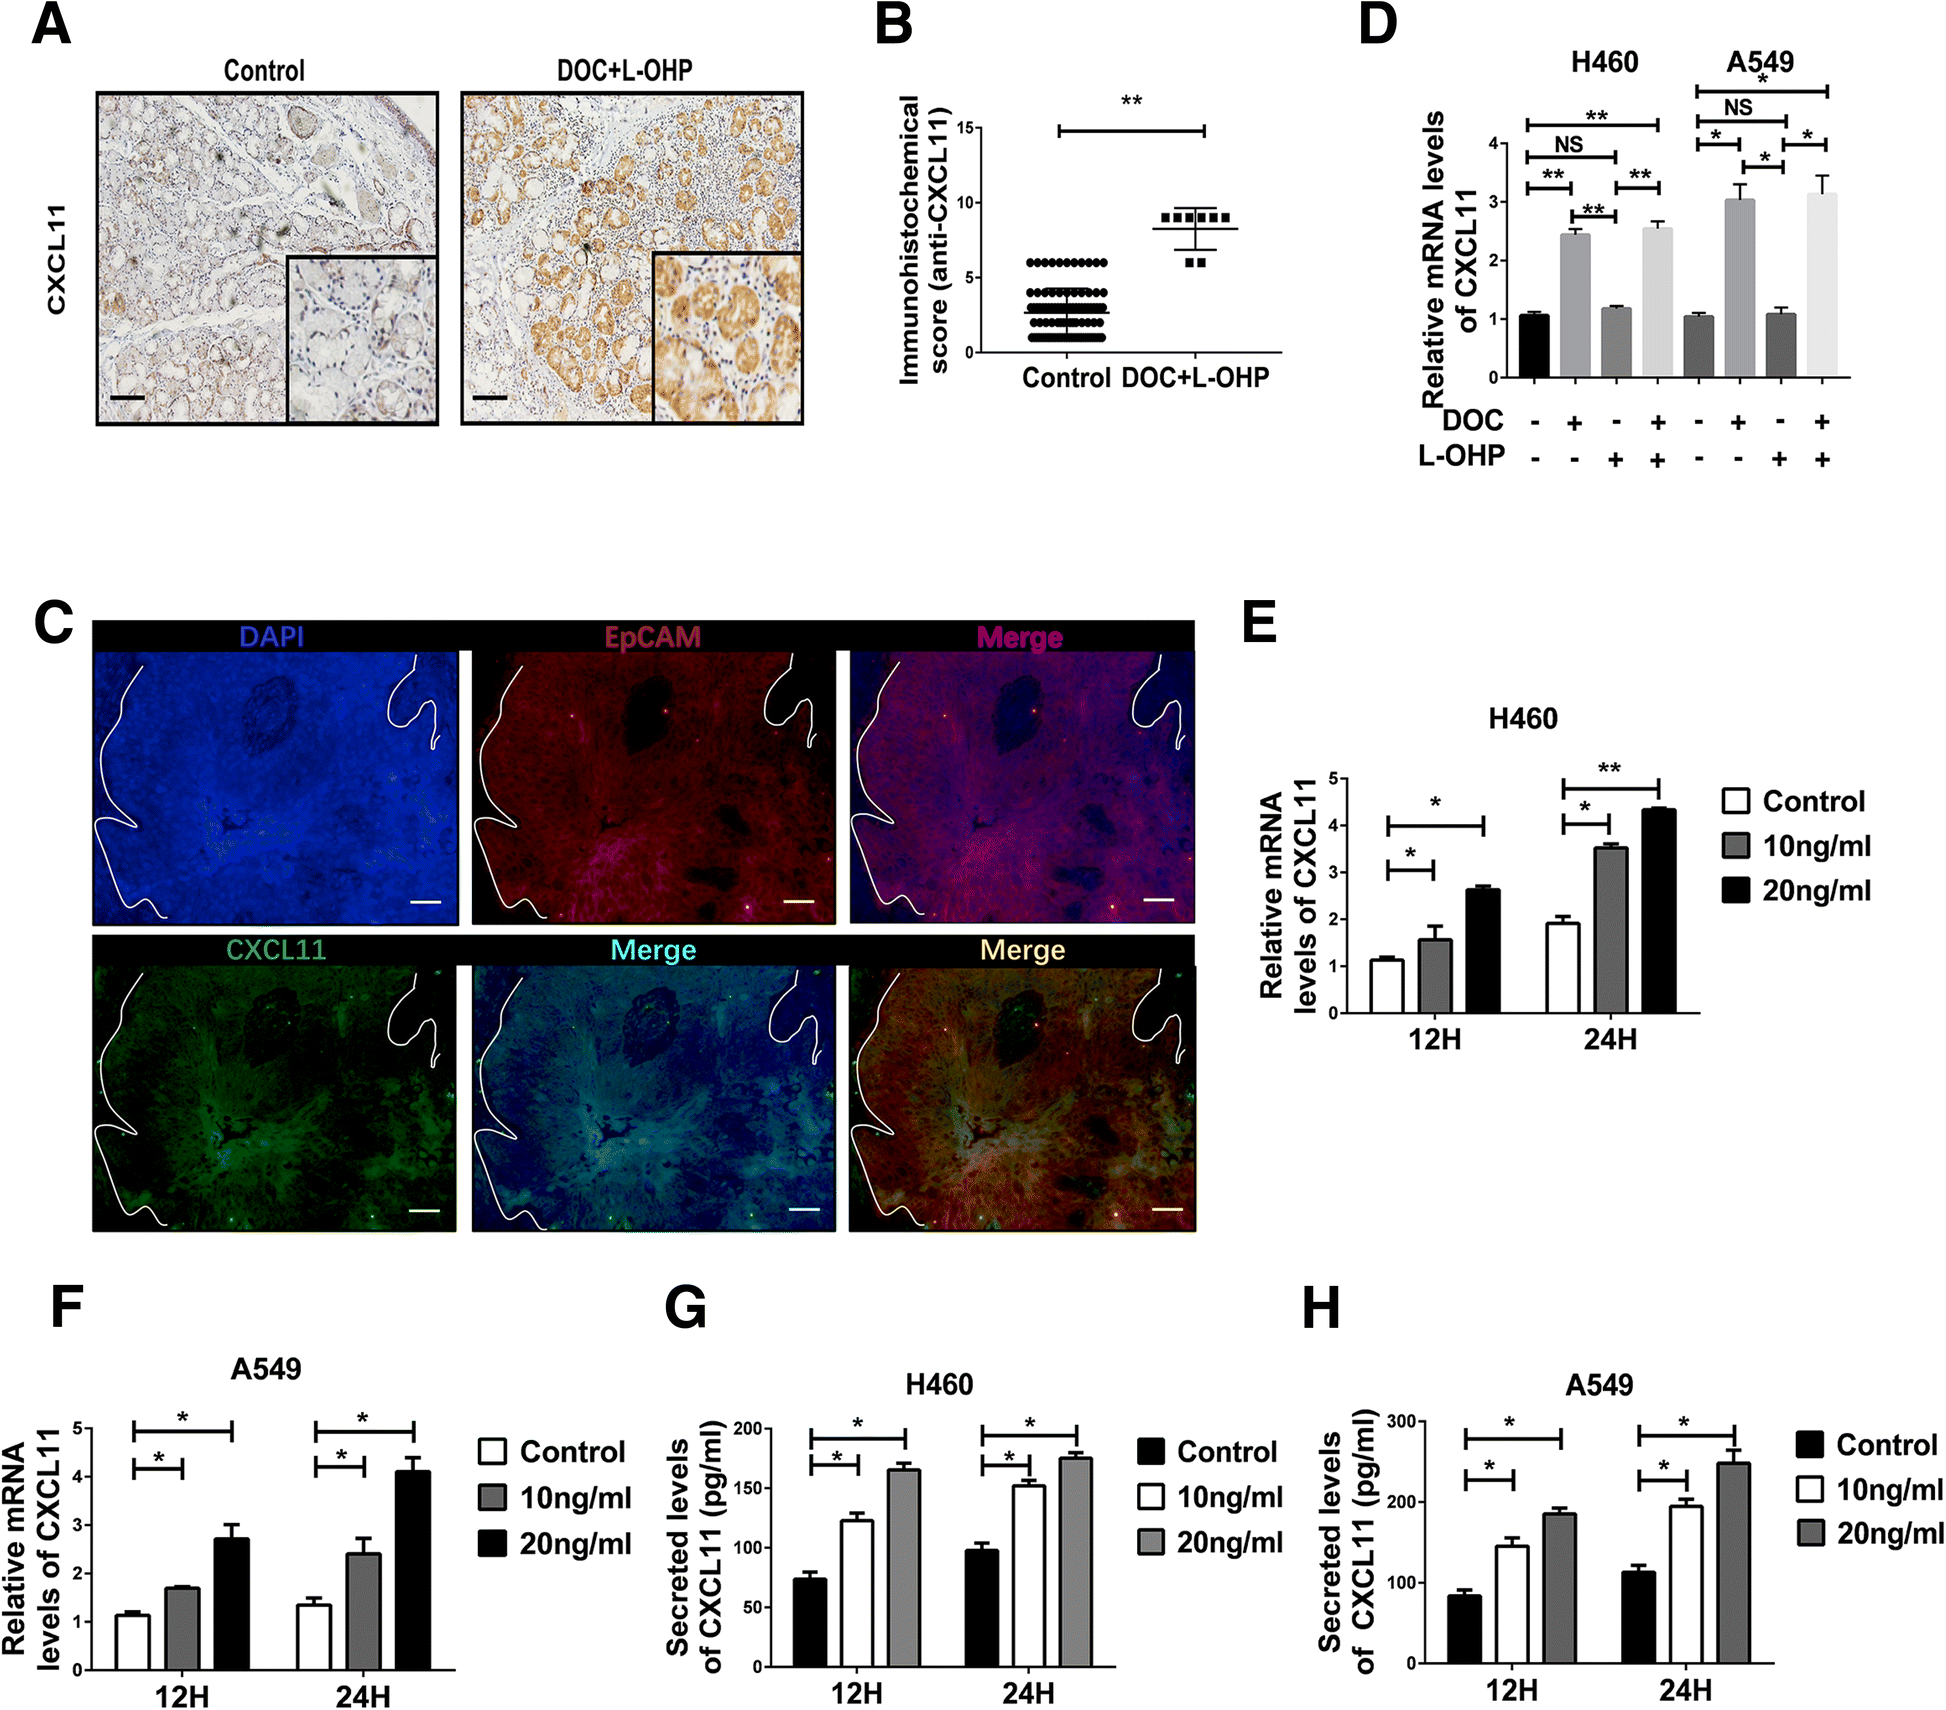 Cancer Cell Secreted Cxcl11 Promoted Cd8 T Cells Infiltration Through Docetaxel Induced Release Of Hmgb1 In Nsclc Journal For Immunotherapy Of Cancer Full Text